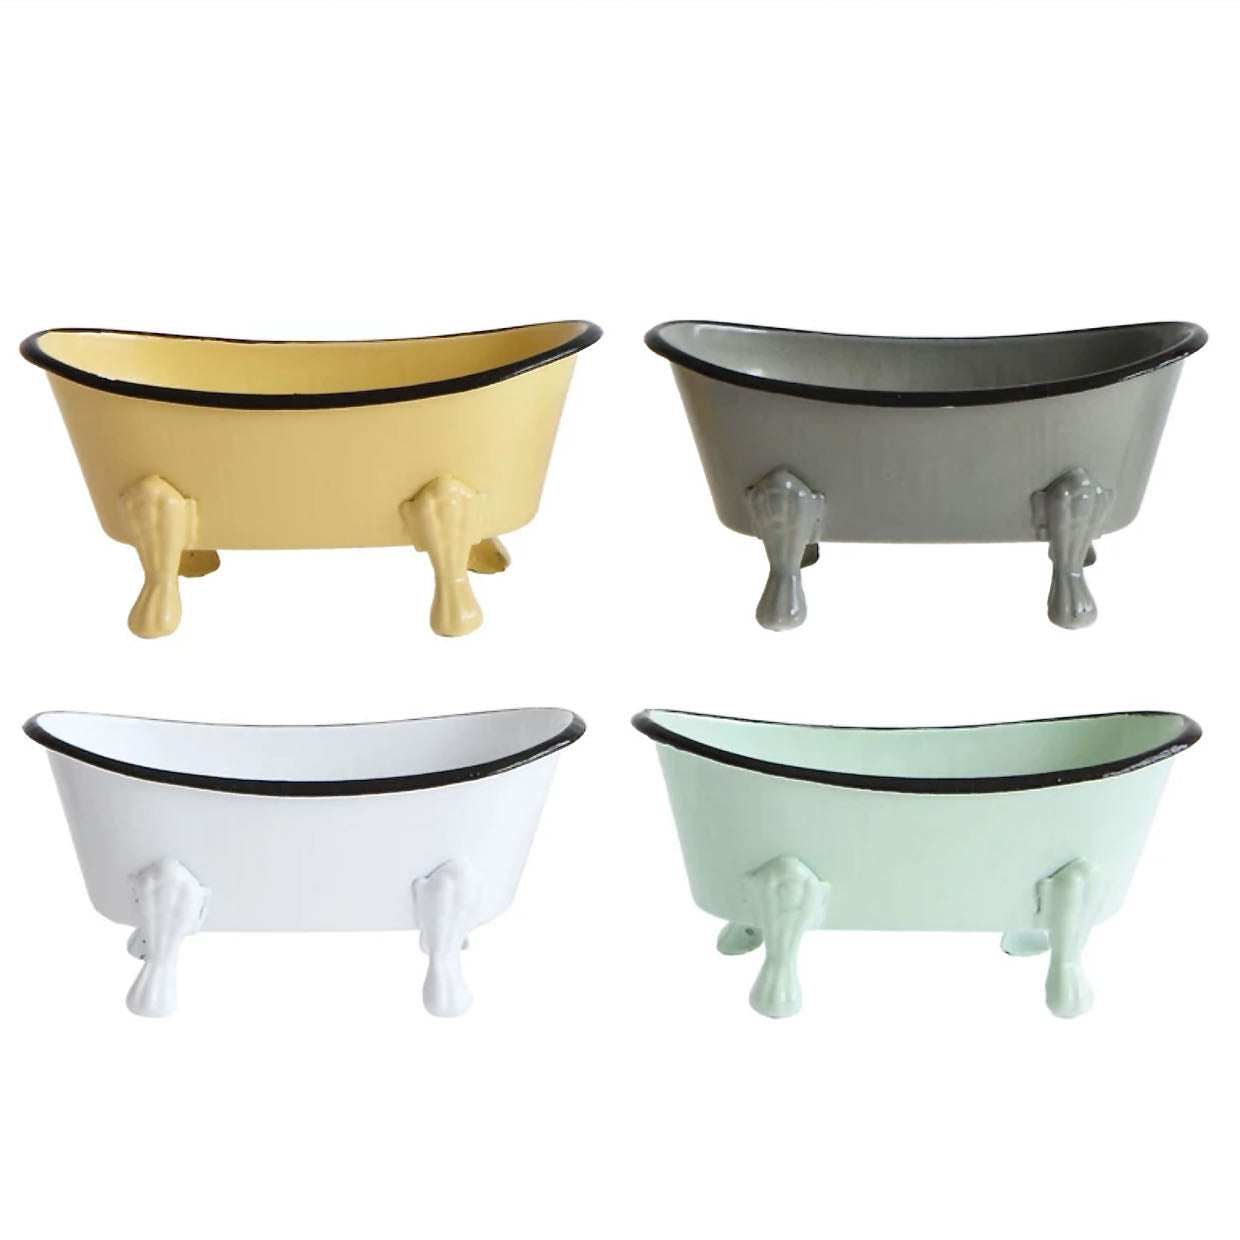 Clawfoot enamel soap dishes shown in all four colors - yellow, gray, white, and pale green. 